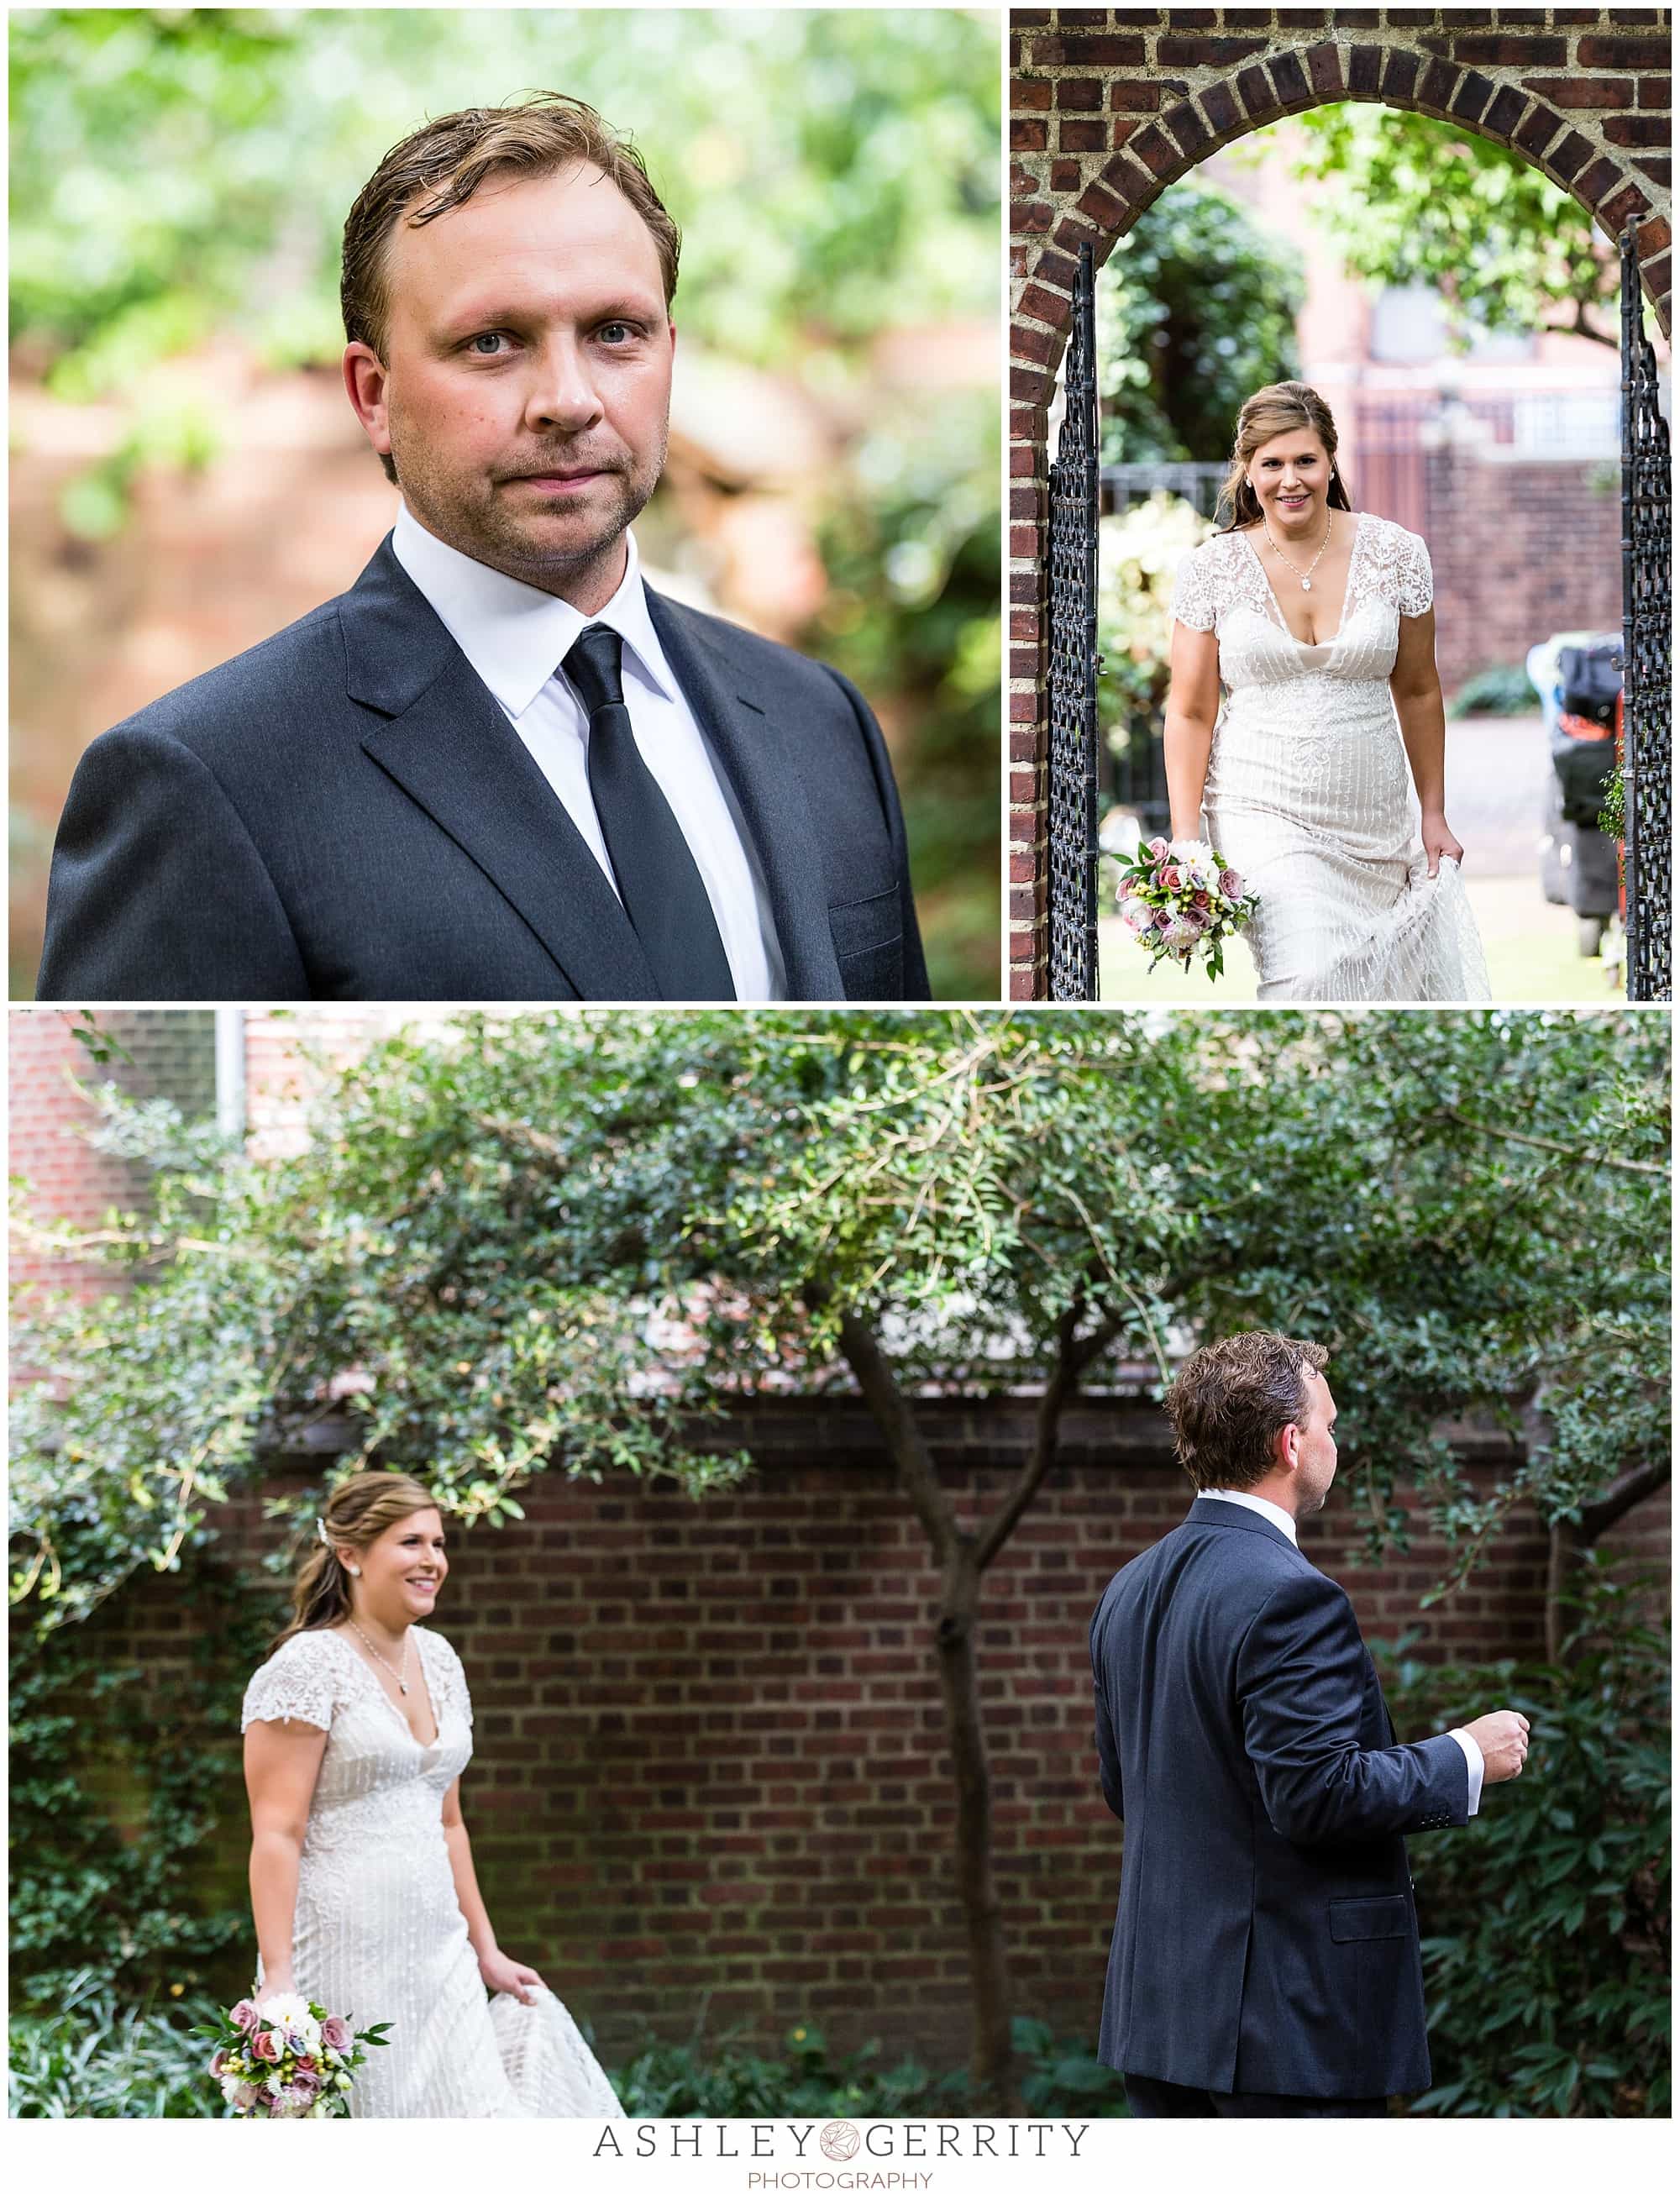 Bride & Groom prepare for their first look at their Colonial Dames wedding in Philadelphia, PA